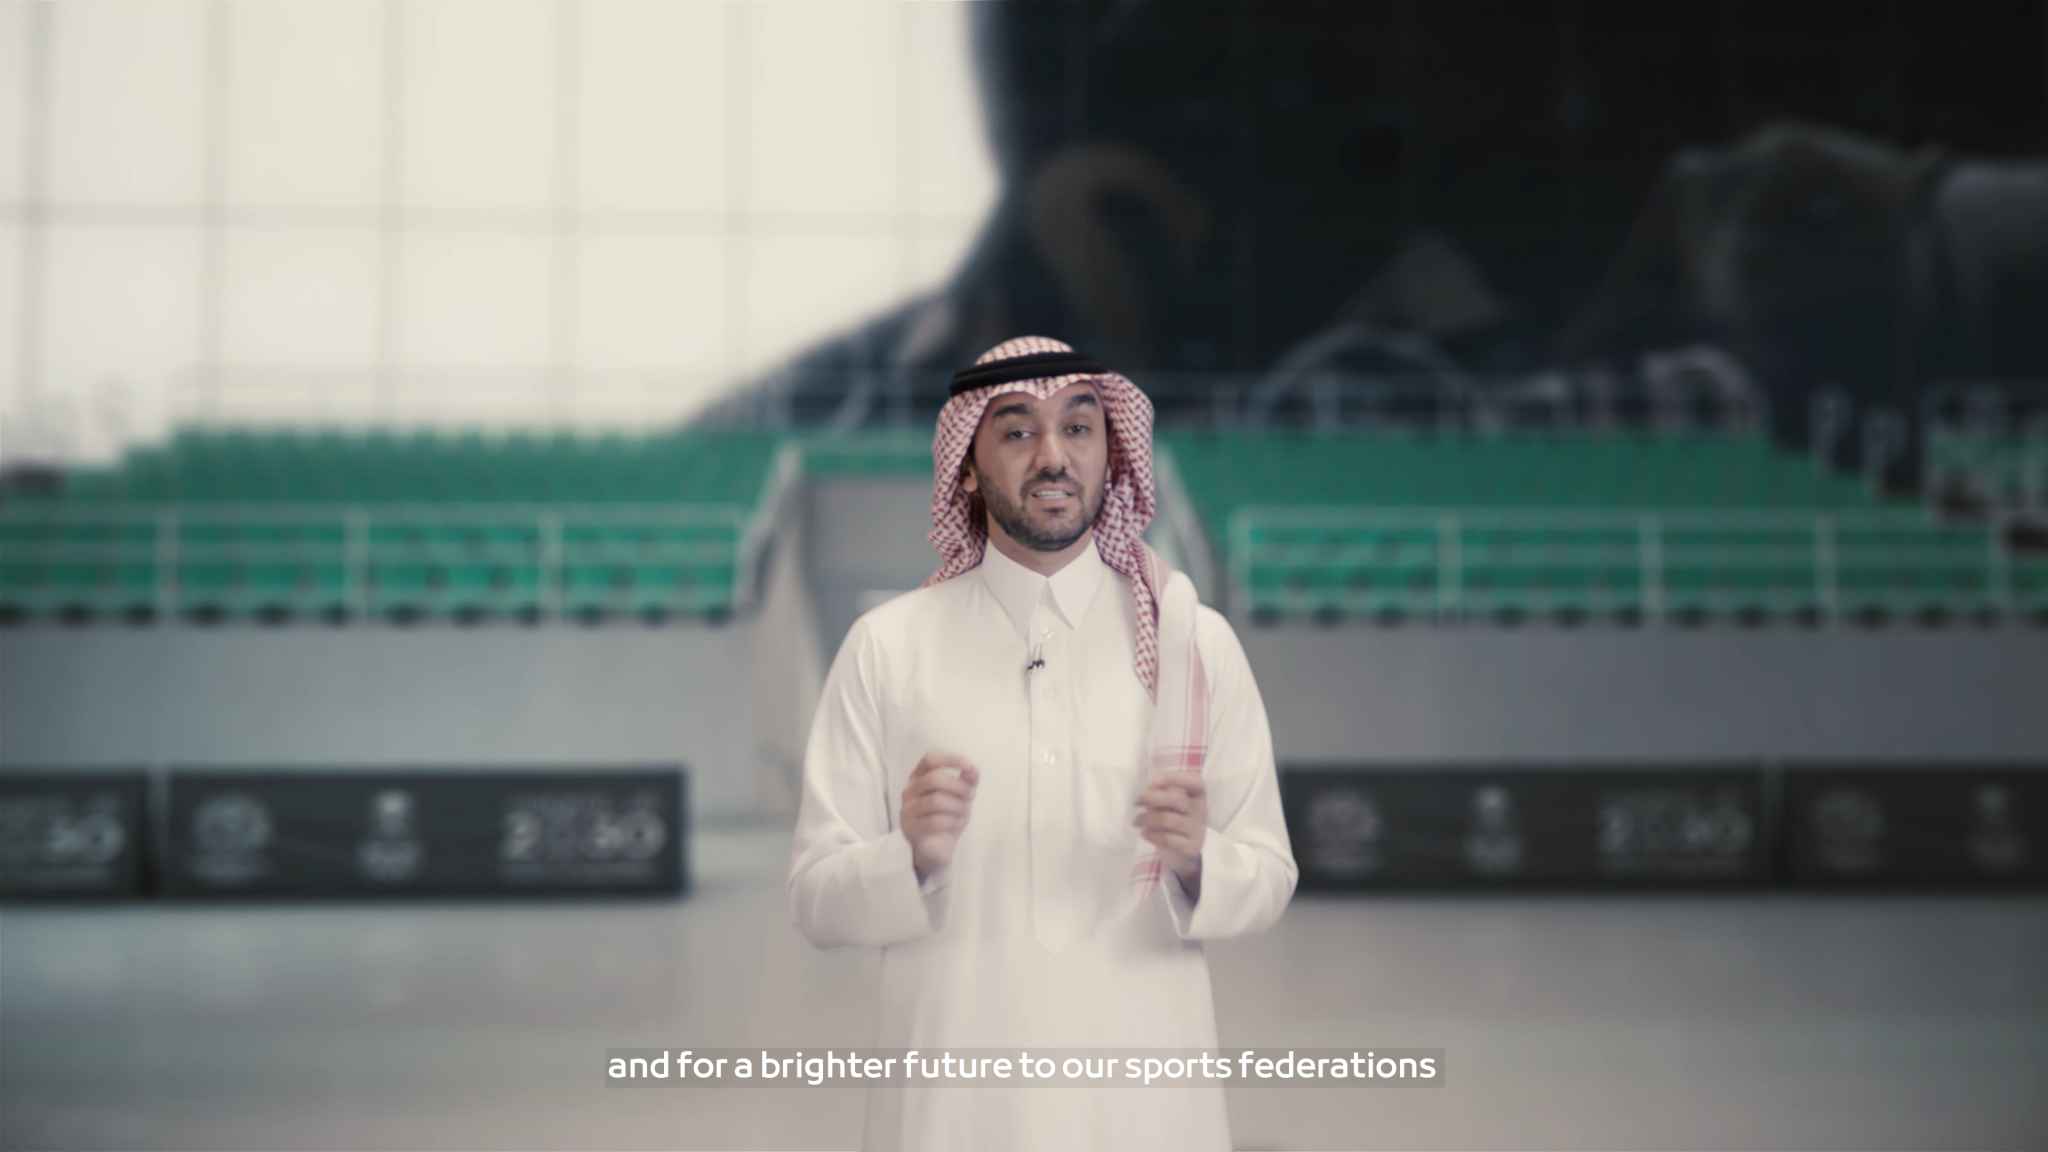 Saudi Arabian Olympic Committee launches $694 million funding programme for sport federations